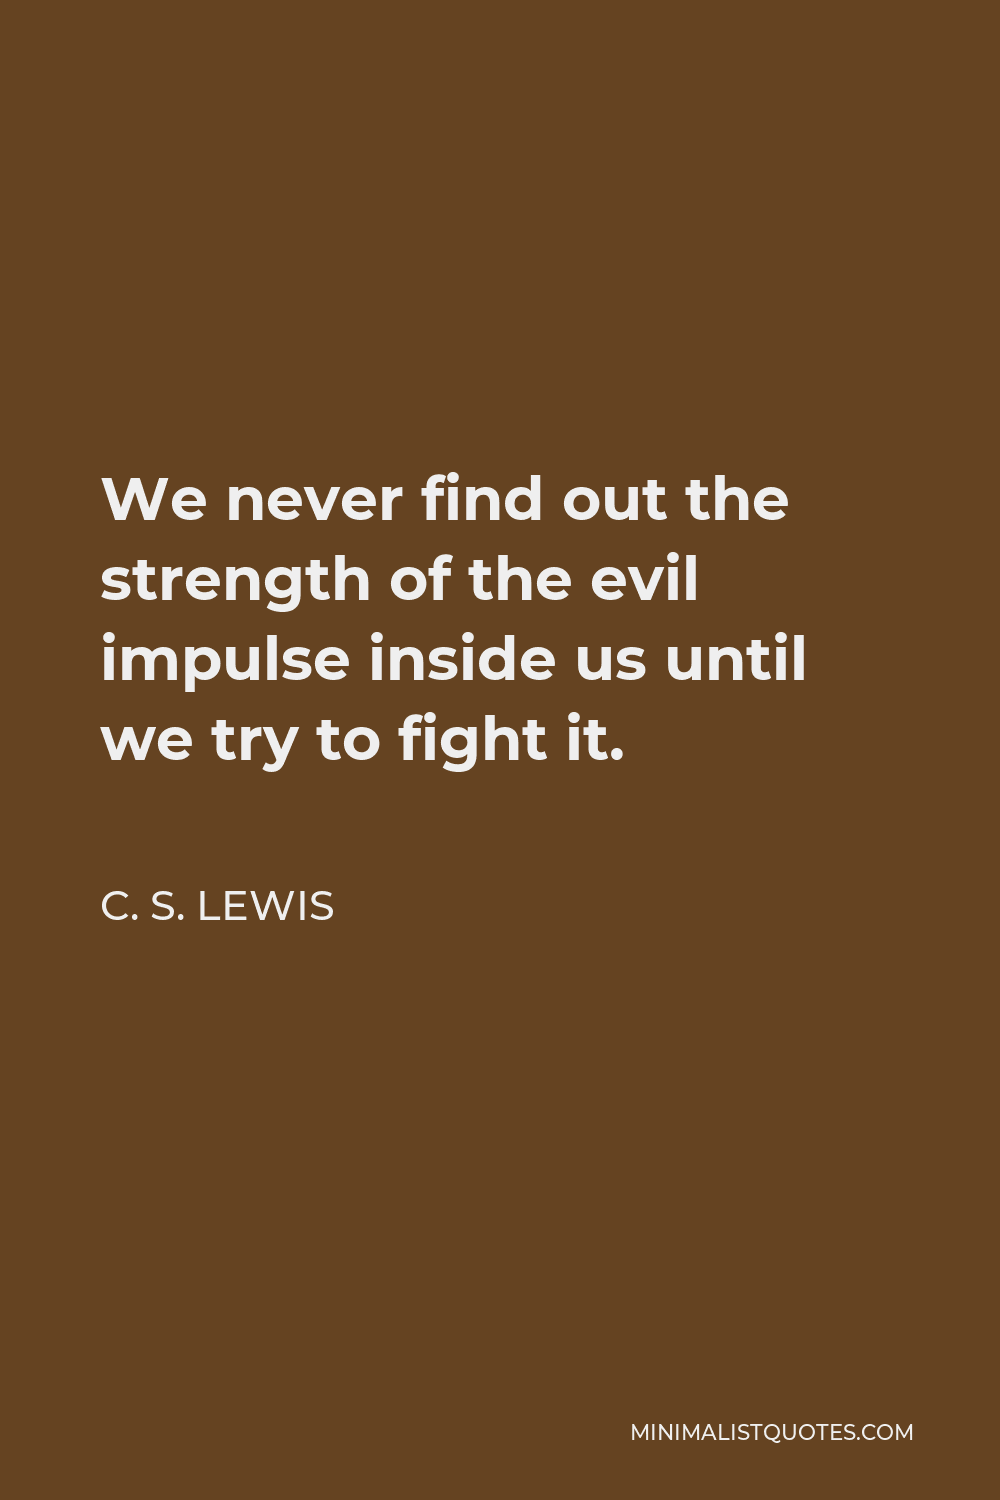 C. S. Lewis Quote - We never find out the strength of the evil impulse inside us until we try to fight it.